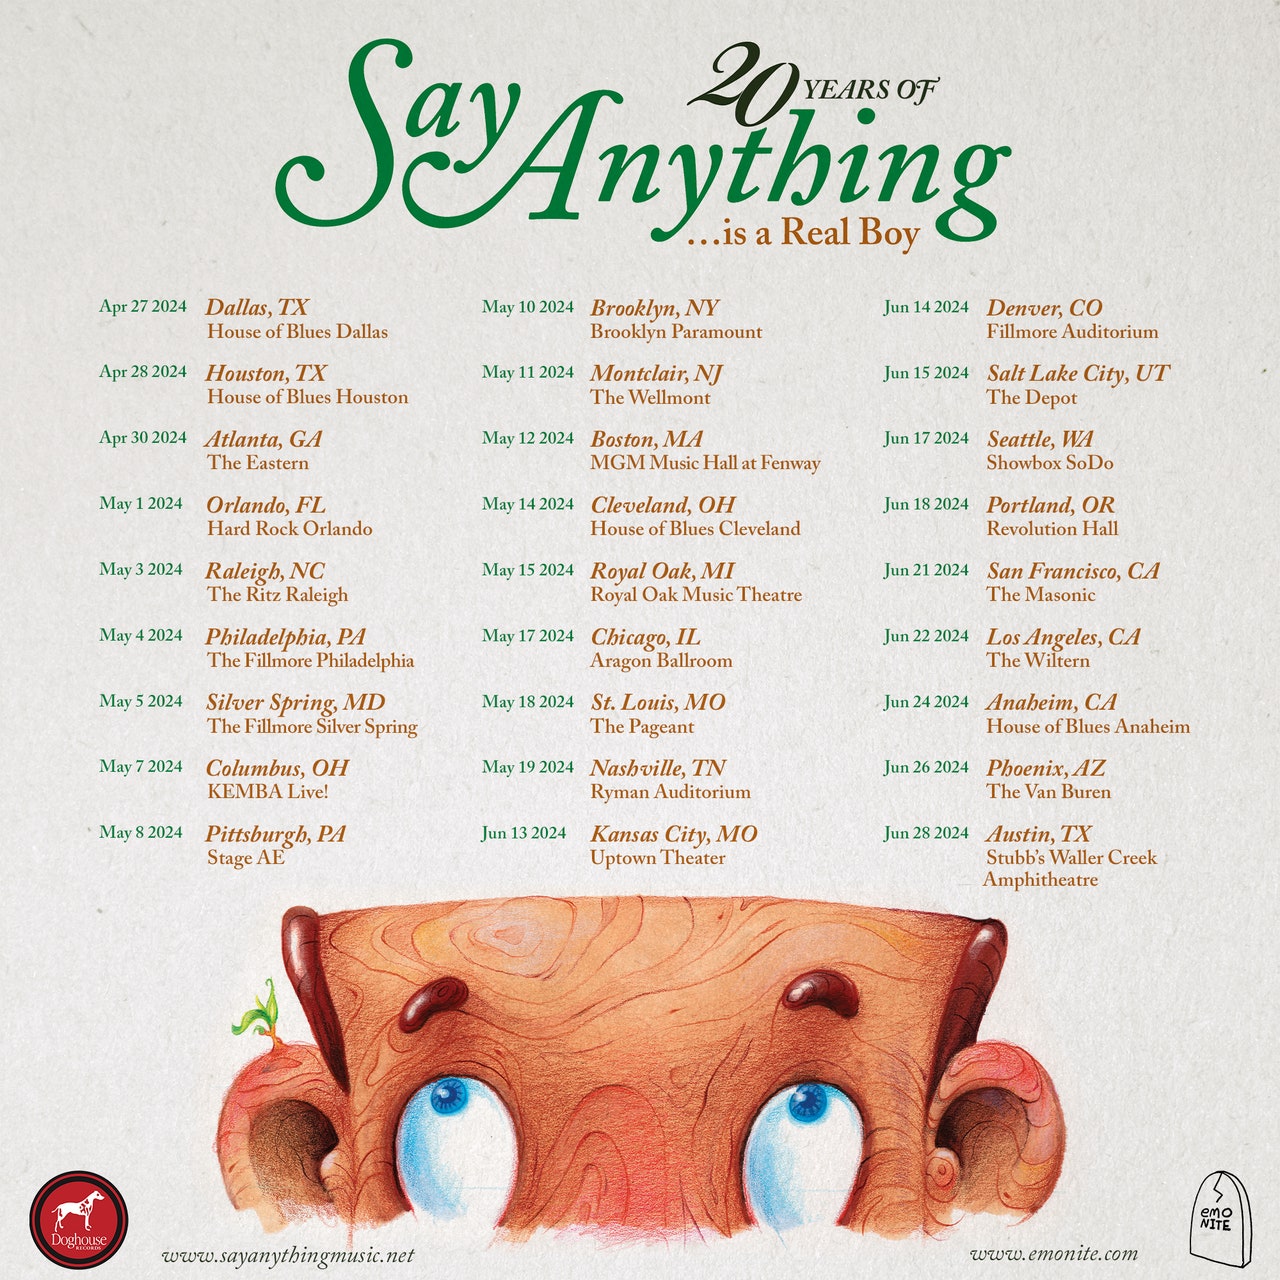 Say Anything - Is A Real Boy 20th Anniversary Tour al Fillmore Auditorium Denver Tickets